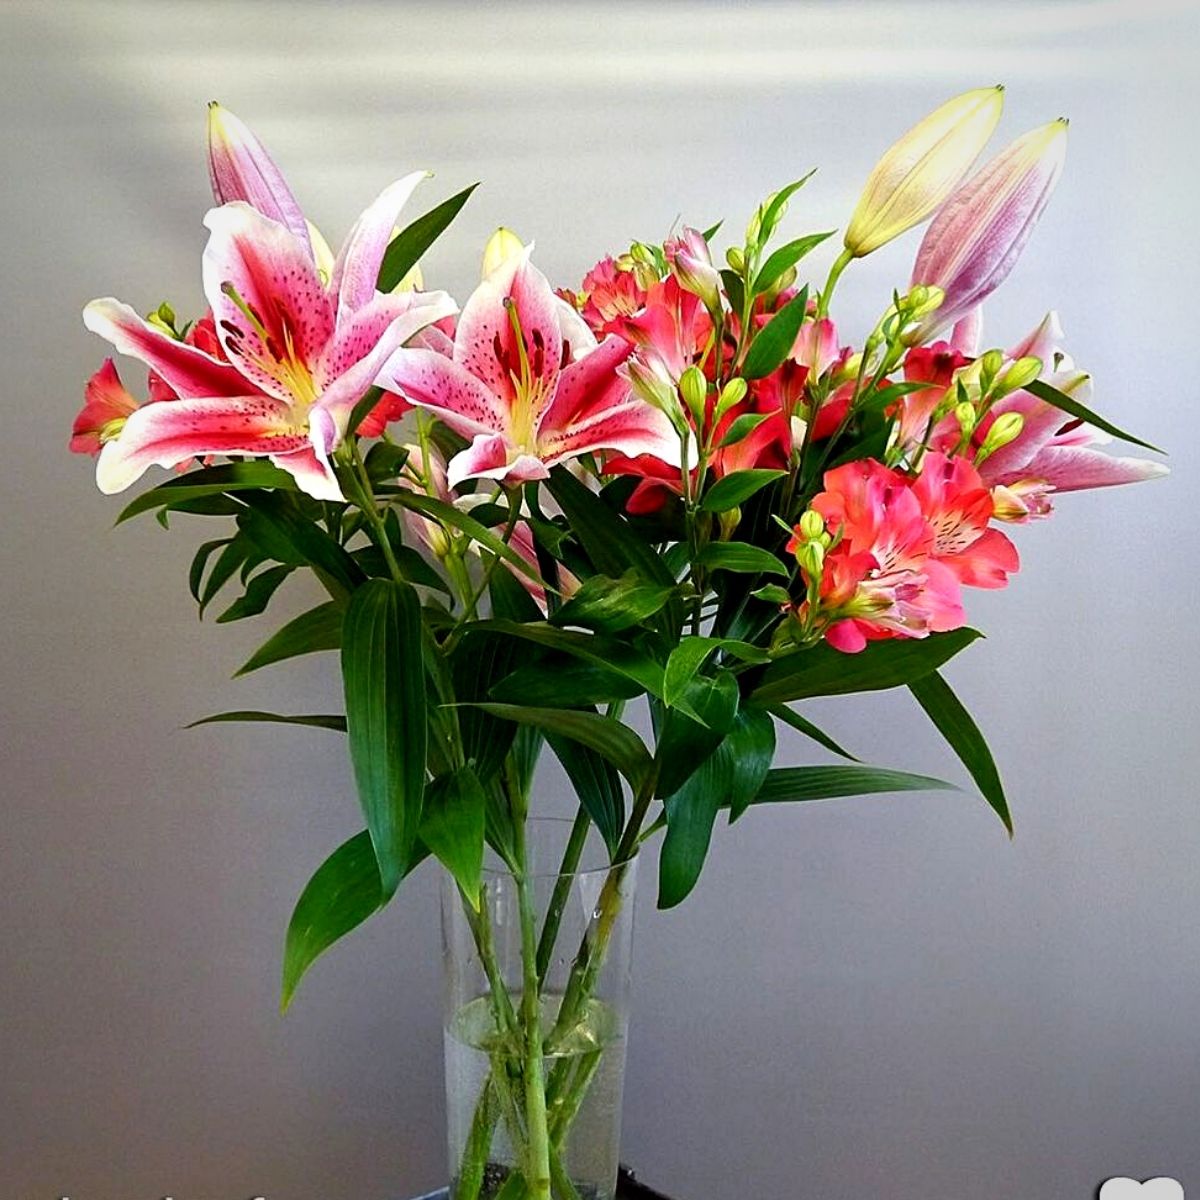 Express Your Creativity With The Enchanting Alstroemeria Blooms